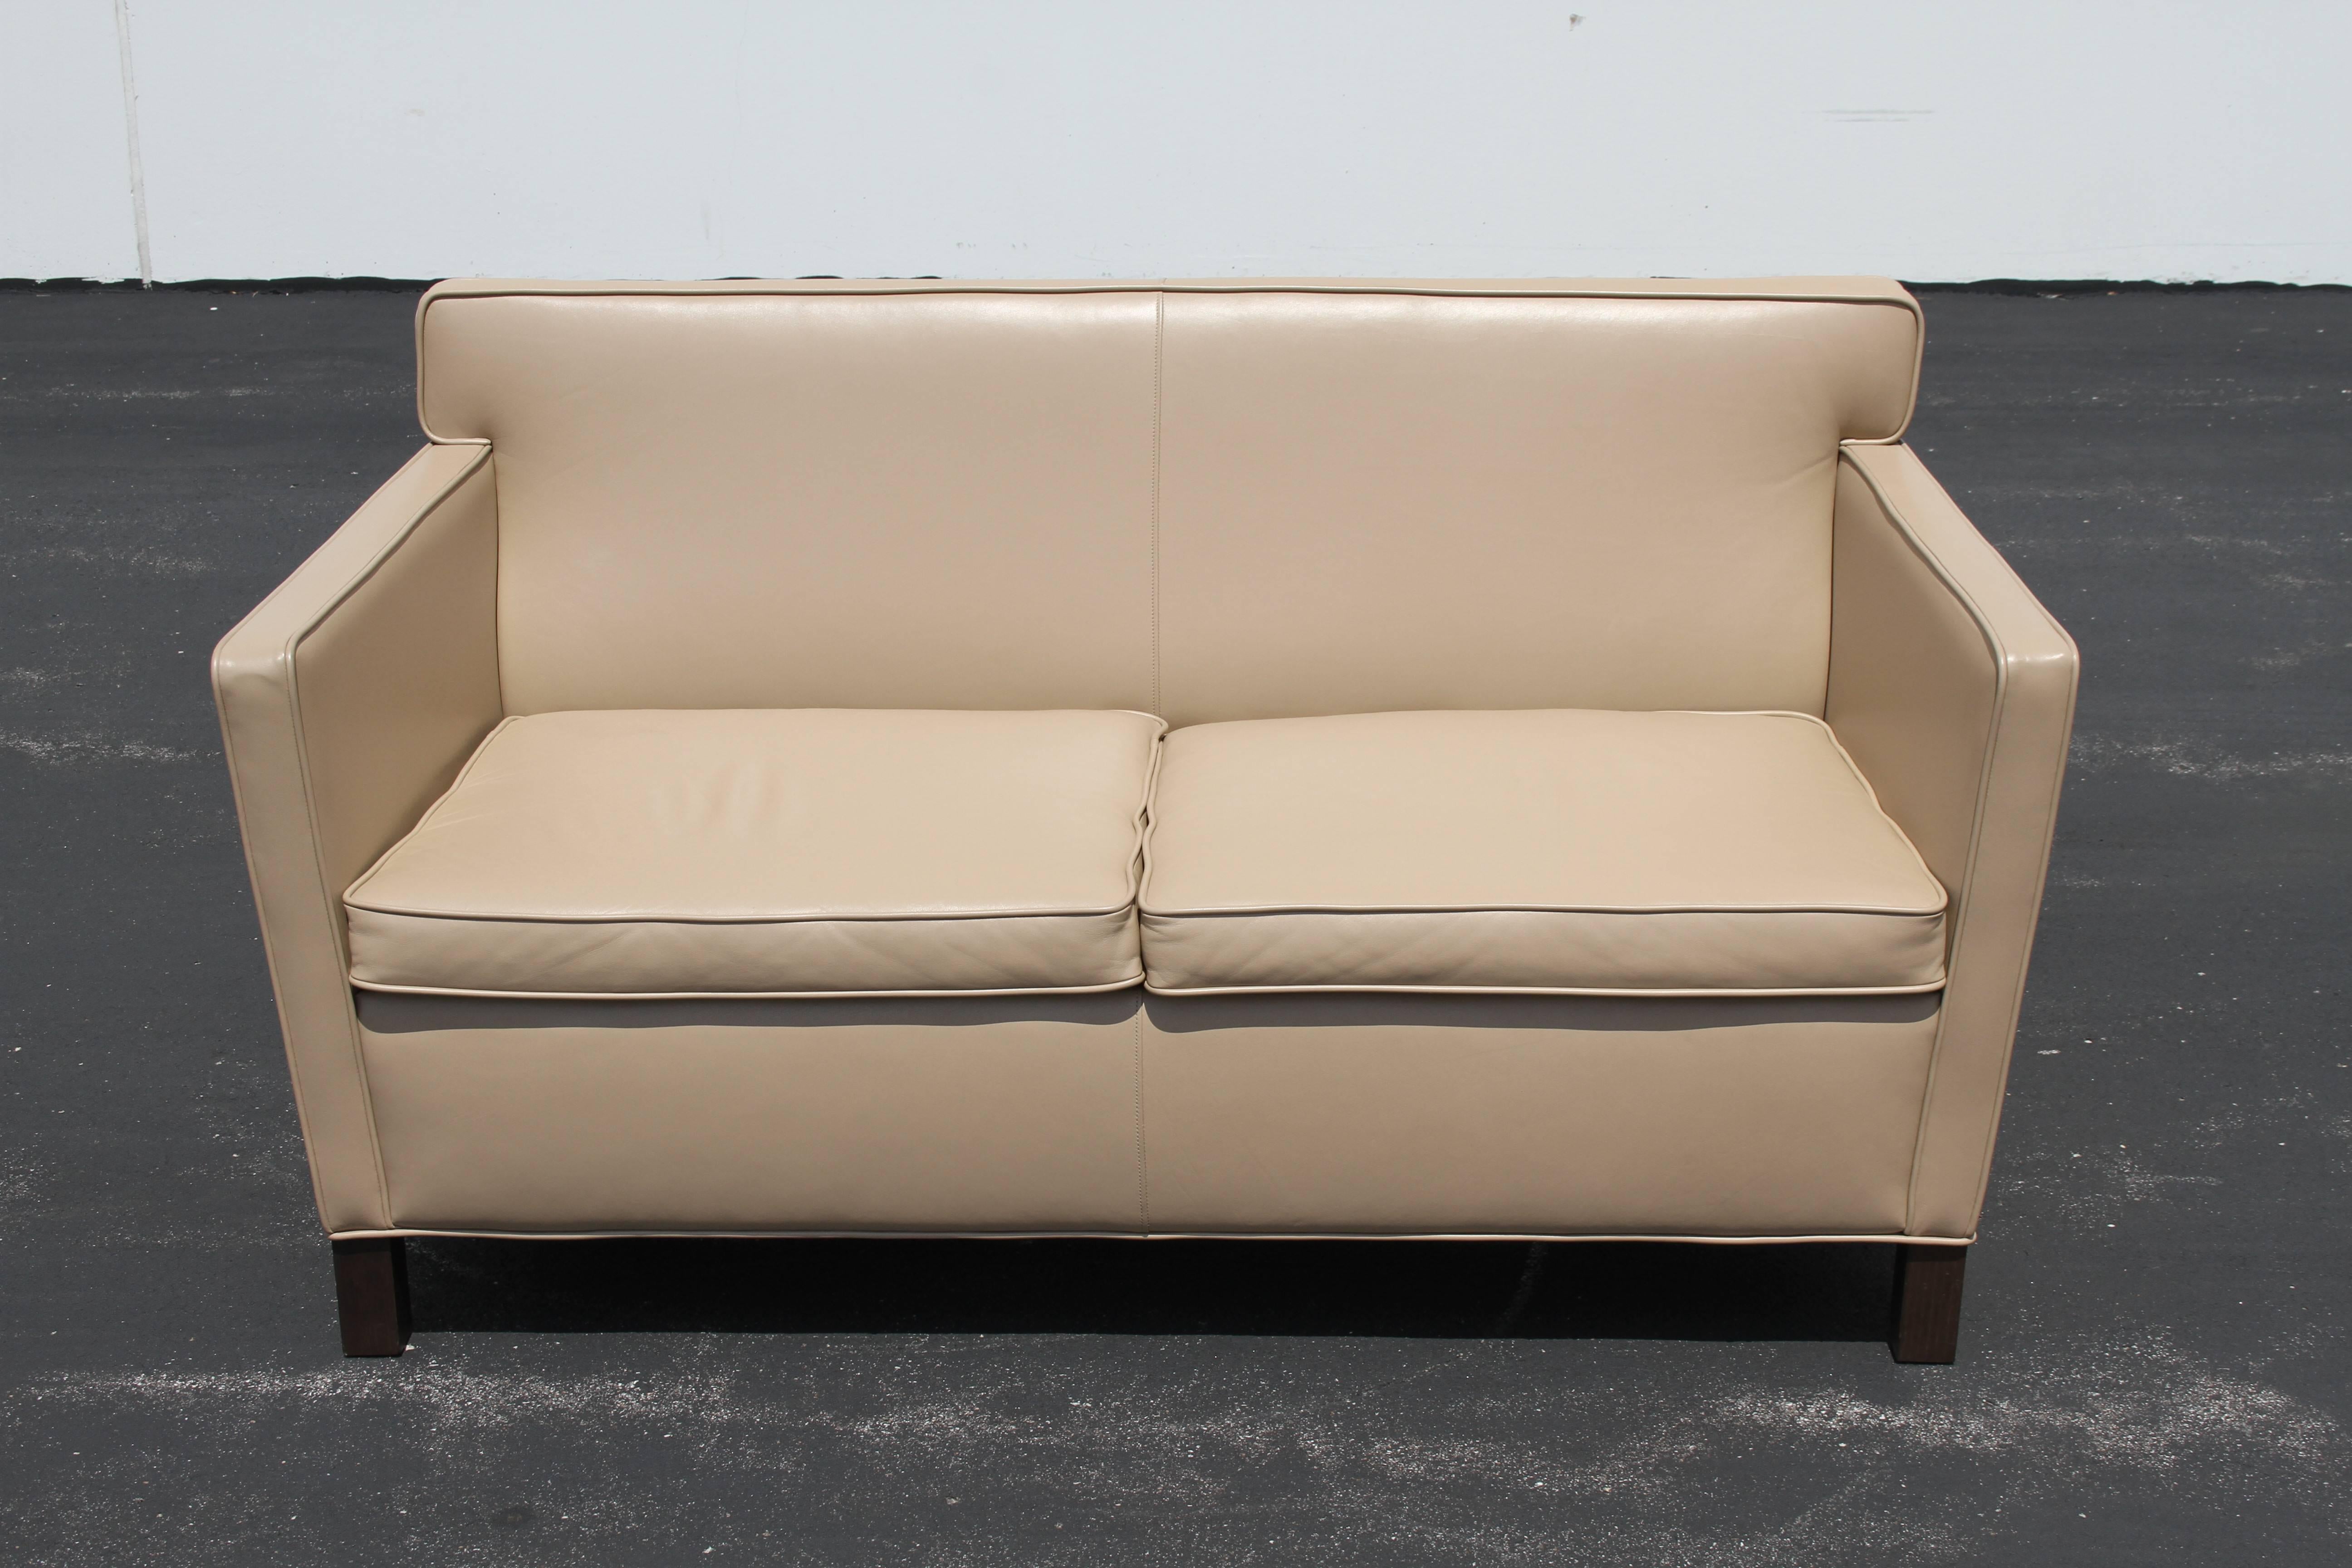 Mies van der Rohe Krefeld Tan leather settee for Knoll. Recent production based on his 1930s designs for the Esters and Lange residences in Krefeld, Germany. Measures: Arm: H 25 and seat is 17